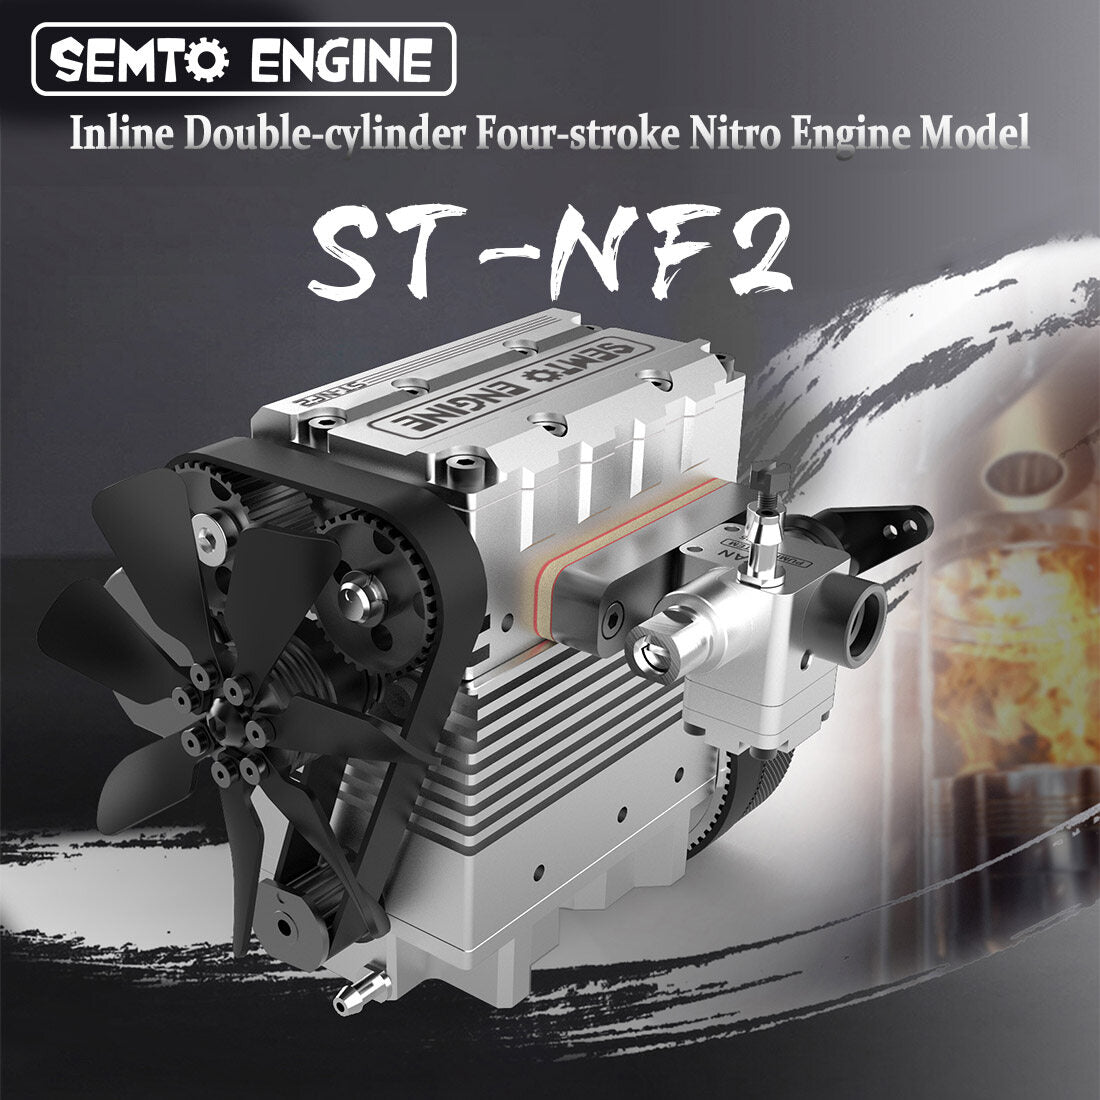 SEMTO ENGINE ST-NF2 7.0cc Mini Inline Double-cylinder Four-stroke Air-cooled Nitro Interal Combustion Engine Model Kit enginediyshop